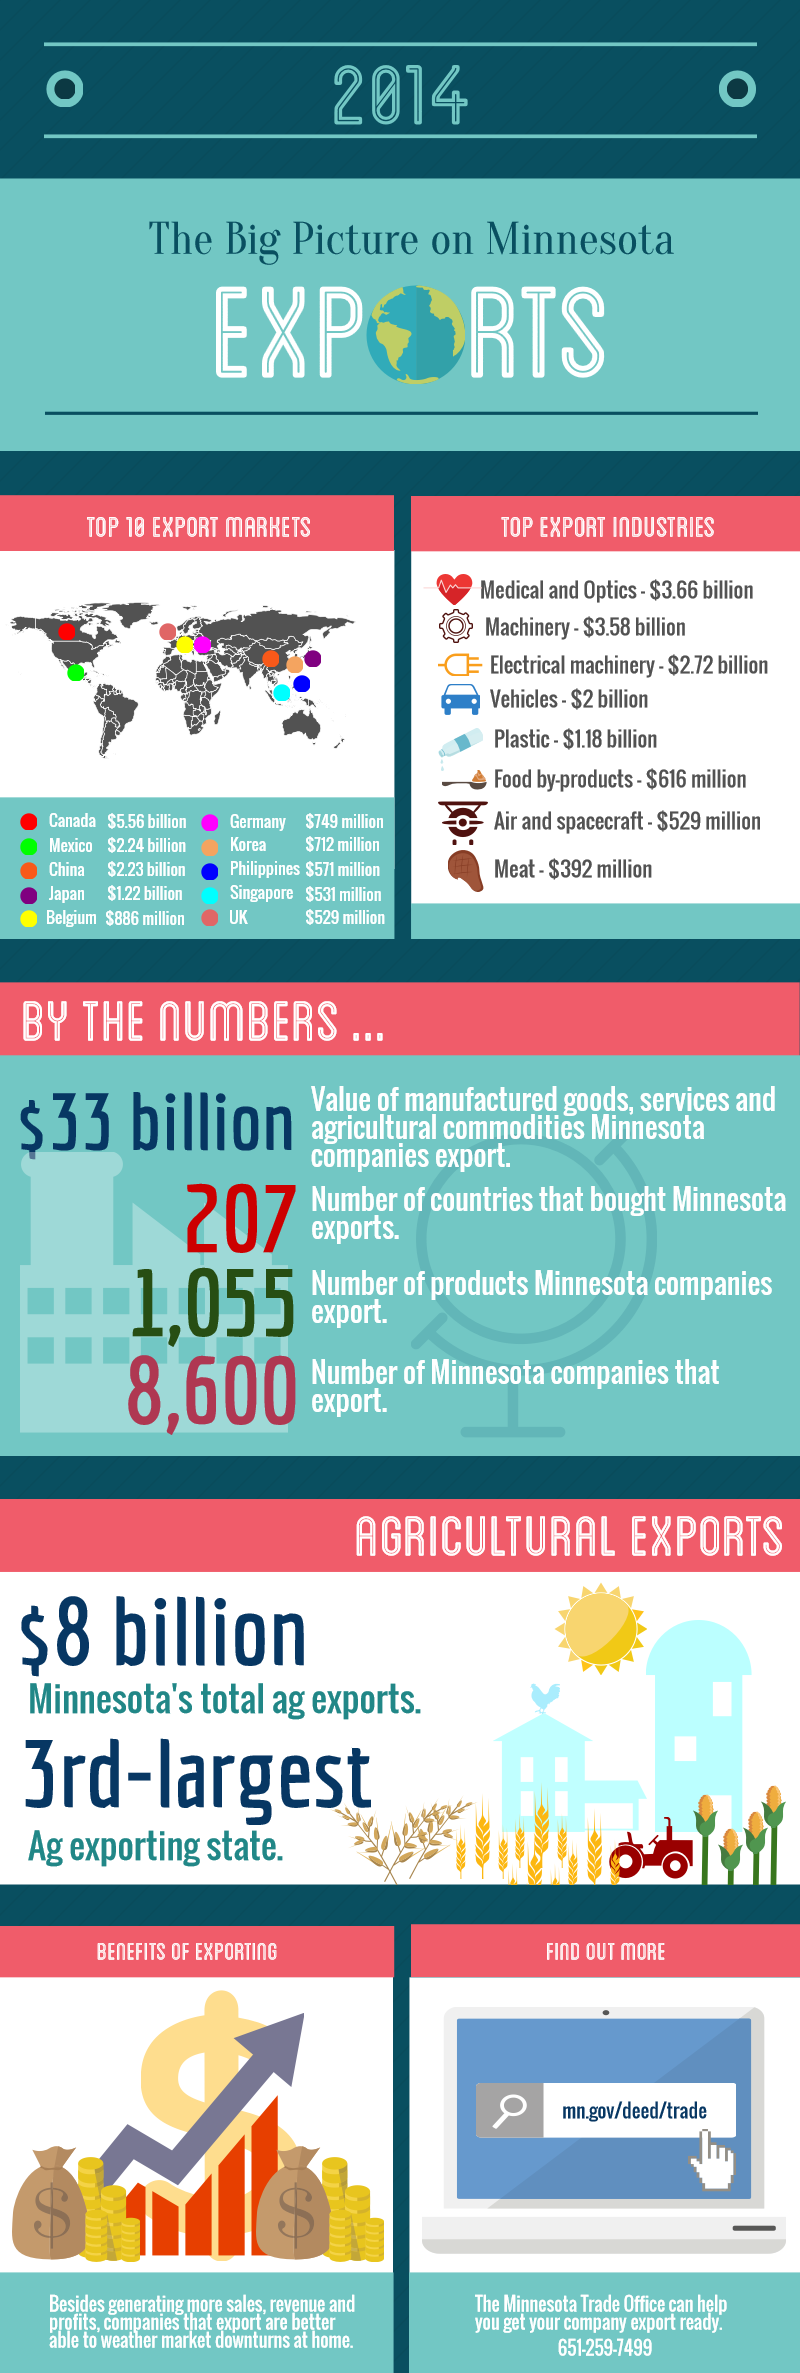 exports-2014